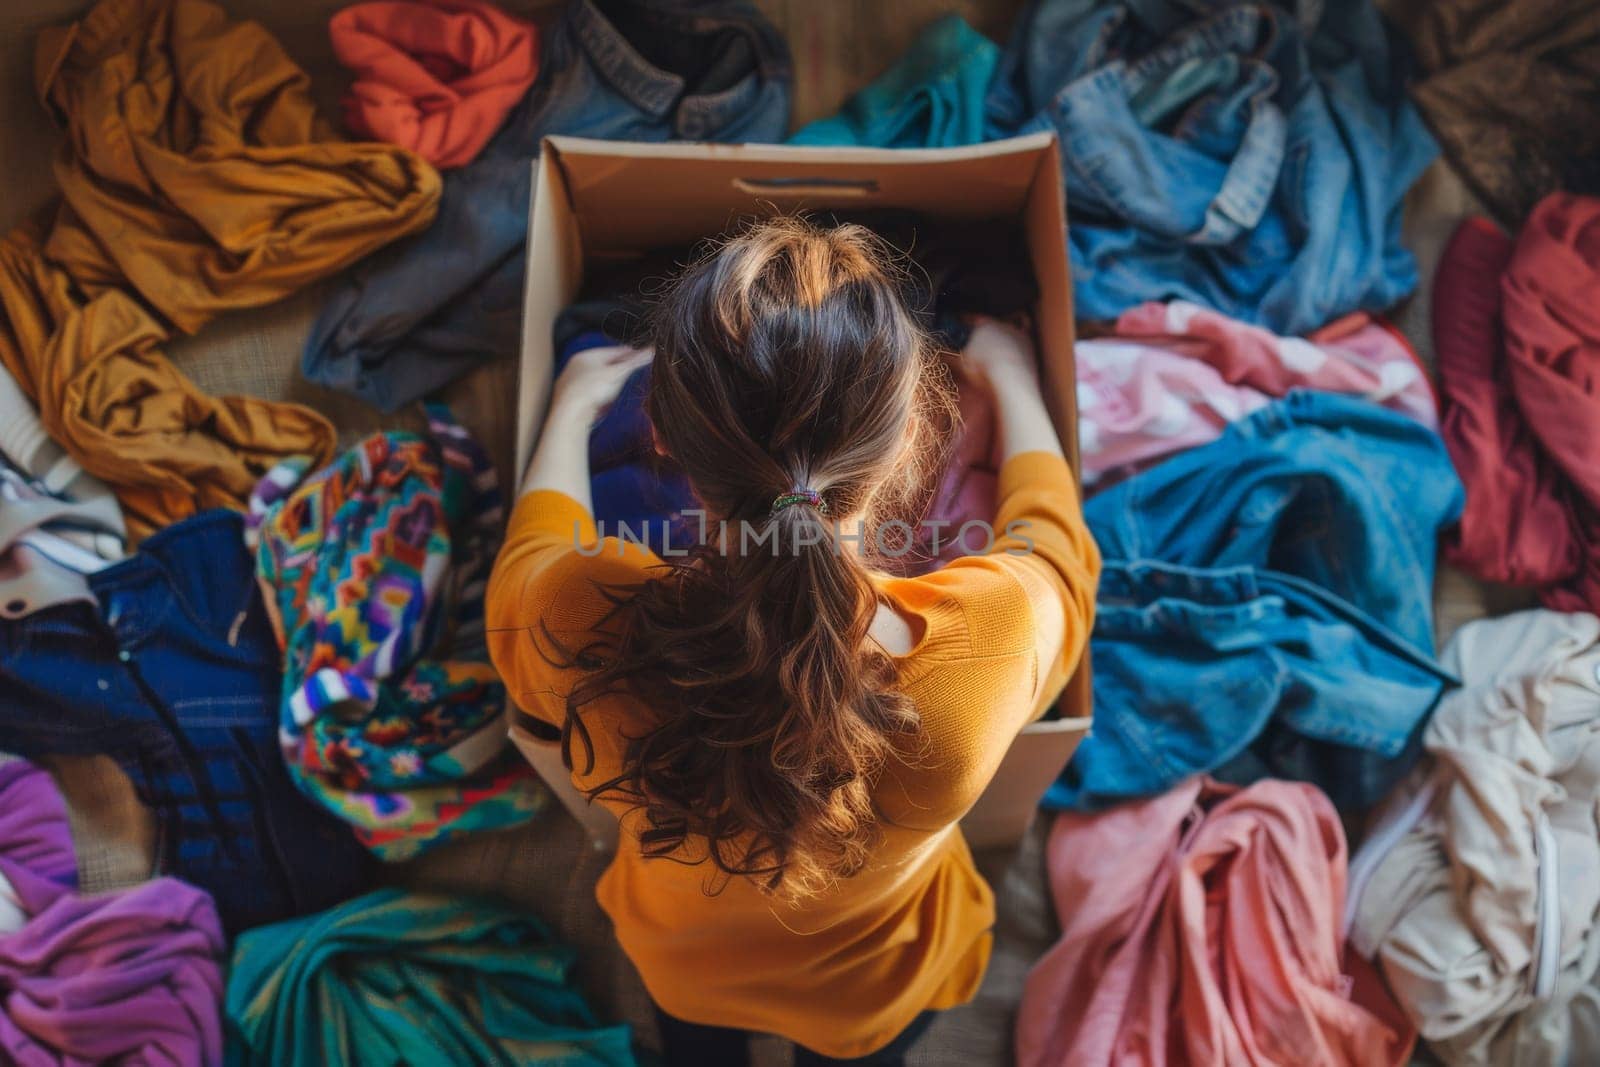 A woman is standing in front of a box full of clothes. She is wearing a yellow shirt and has her hair in a ponytail. The clothes in the box are all different colors and styles